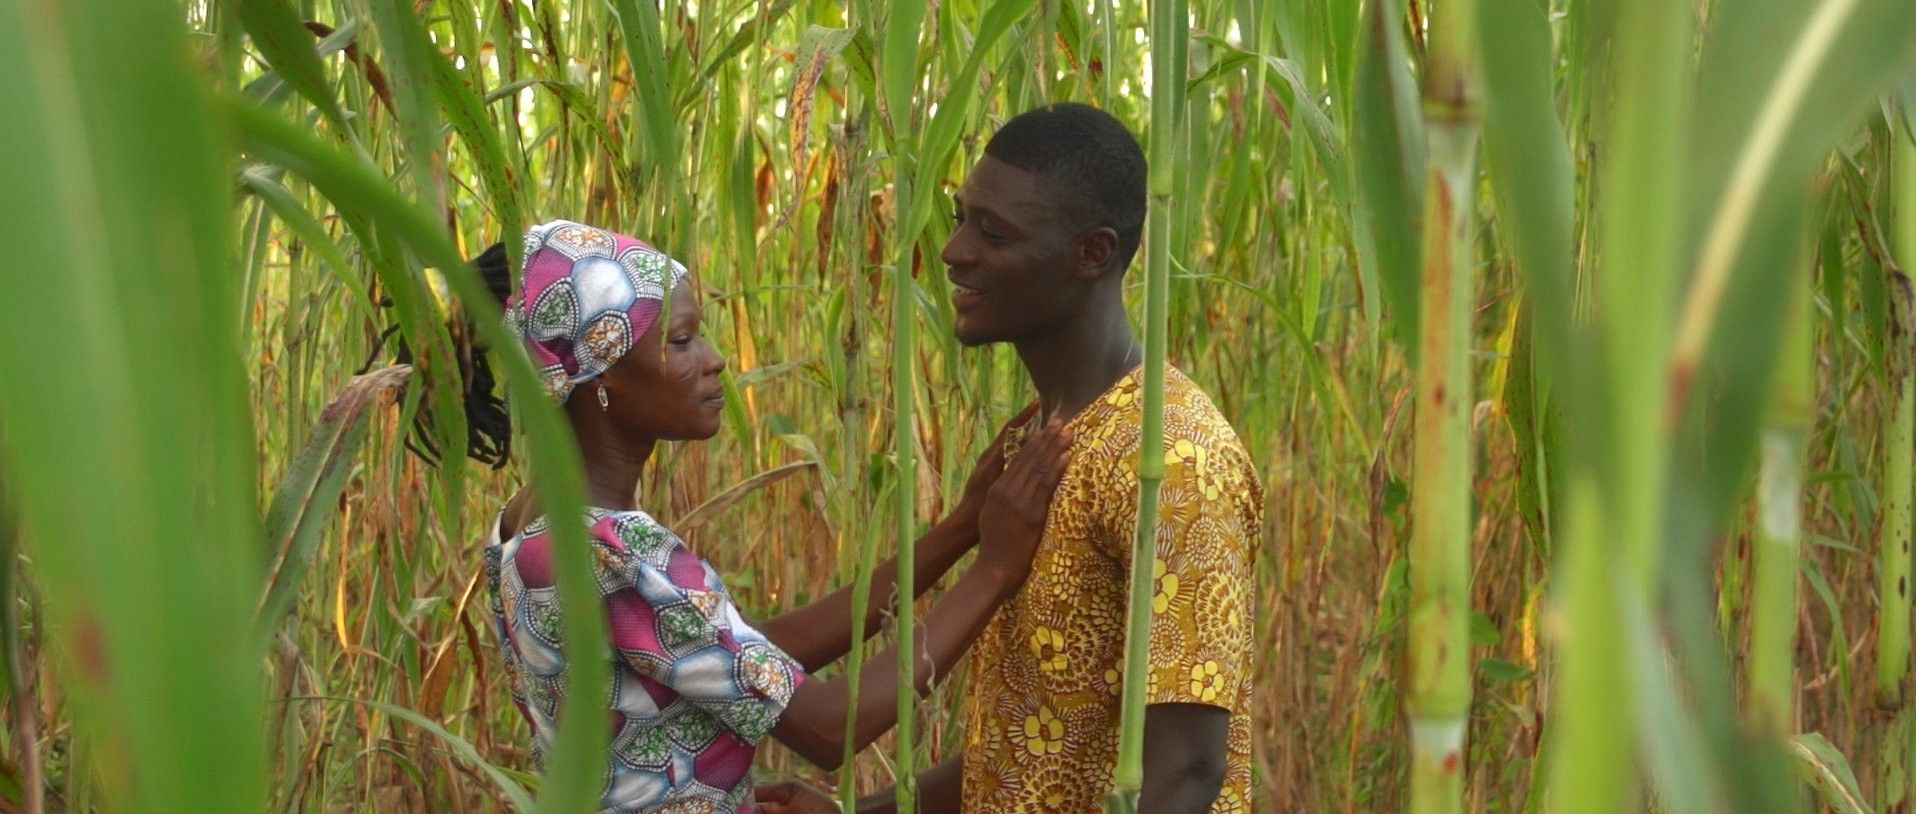 "Nakom" is the first film from Ghana to play the Berlinale.